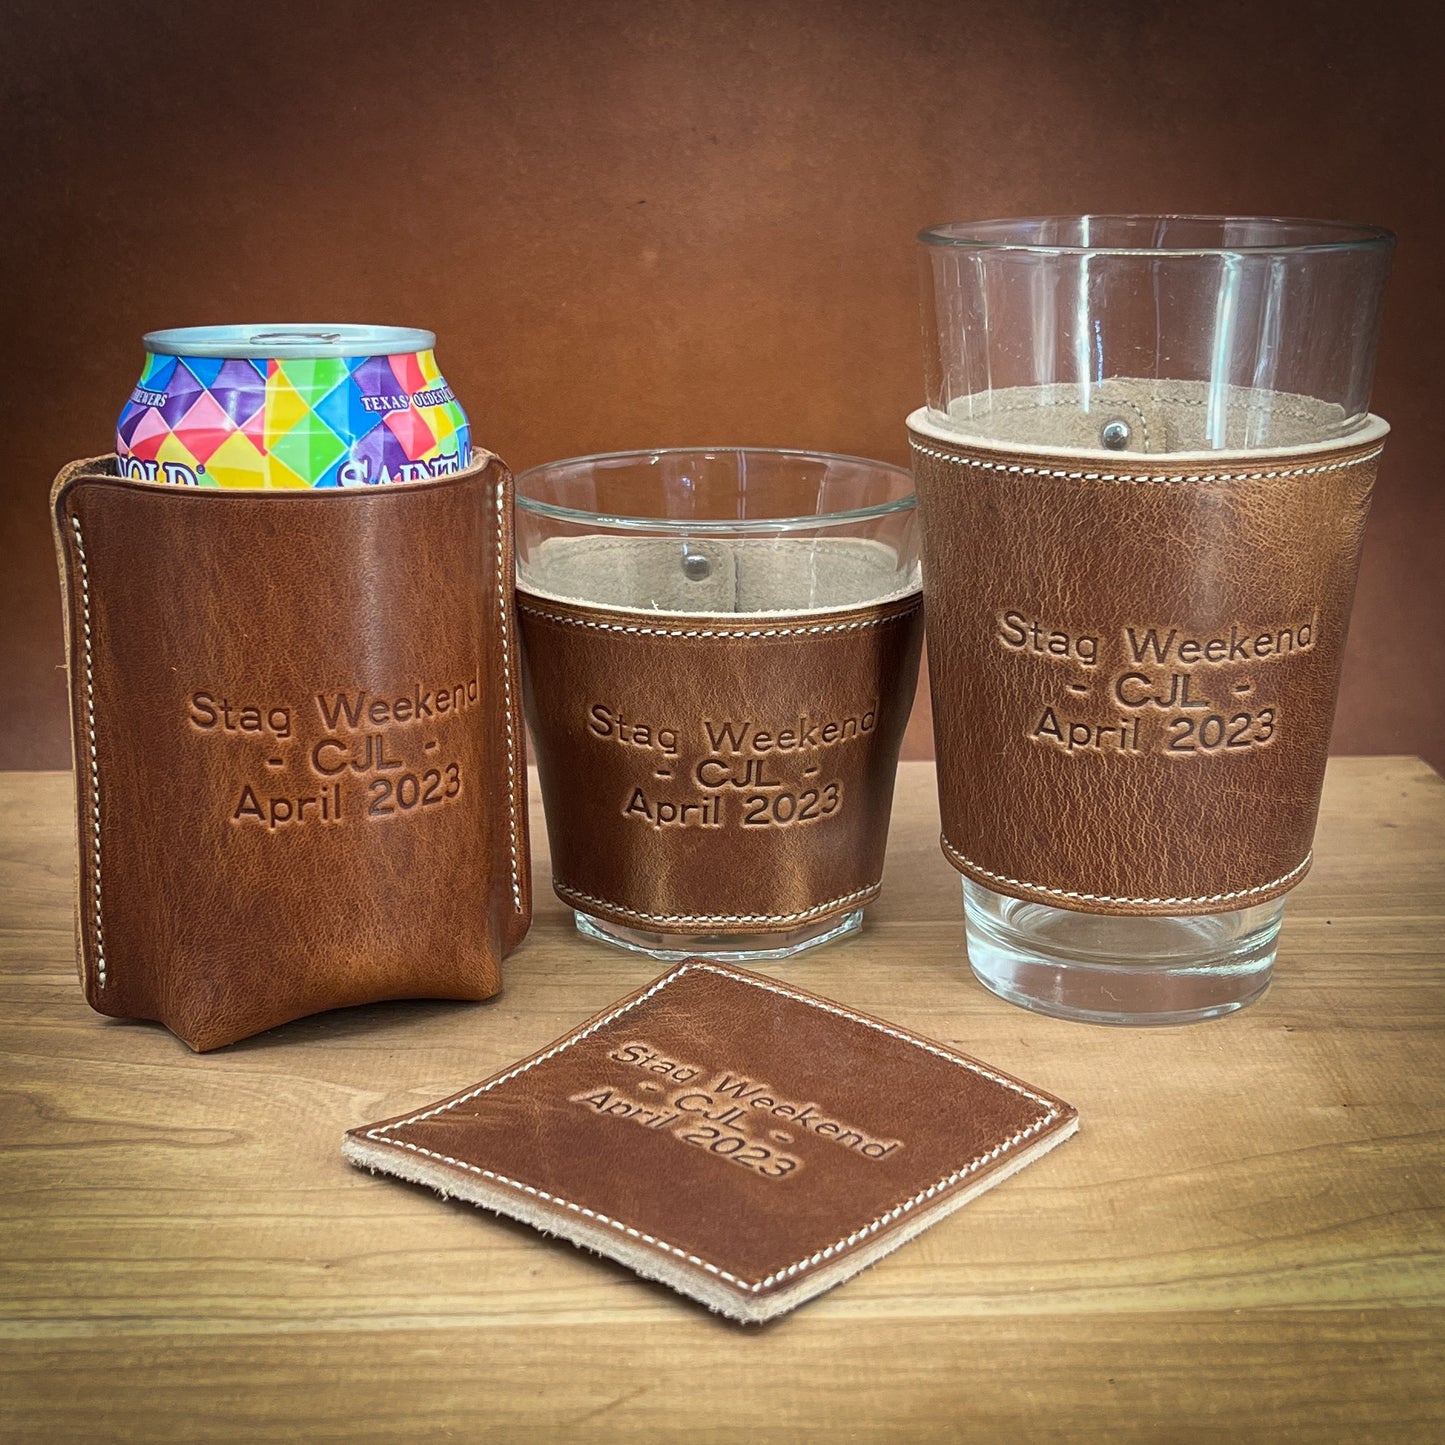 Bachelor Party Pint Glasses, Whiskey Glasses and Can Wraps in Horween leather.  Handmade to Order in Houston, TX